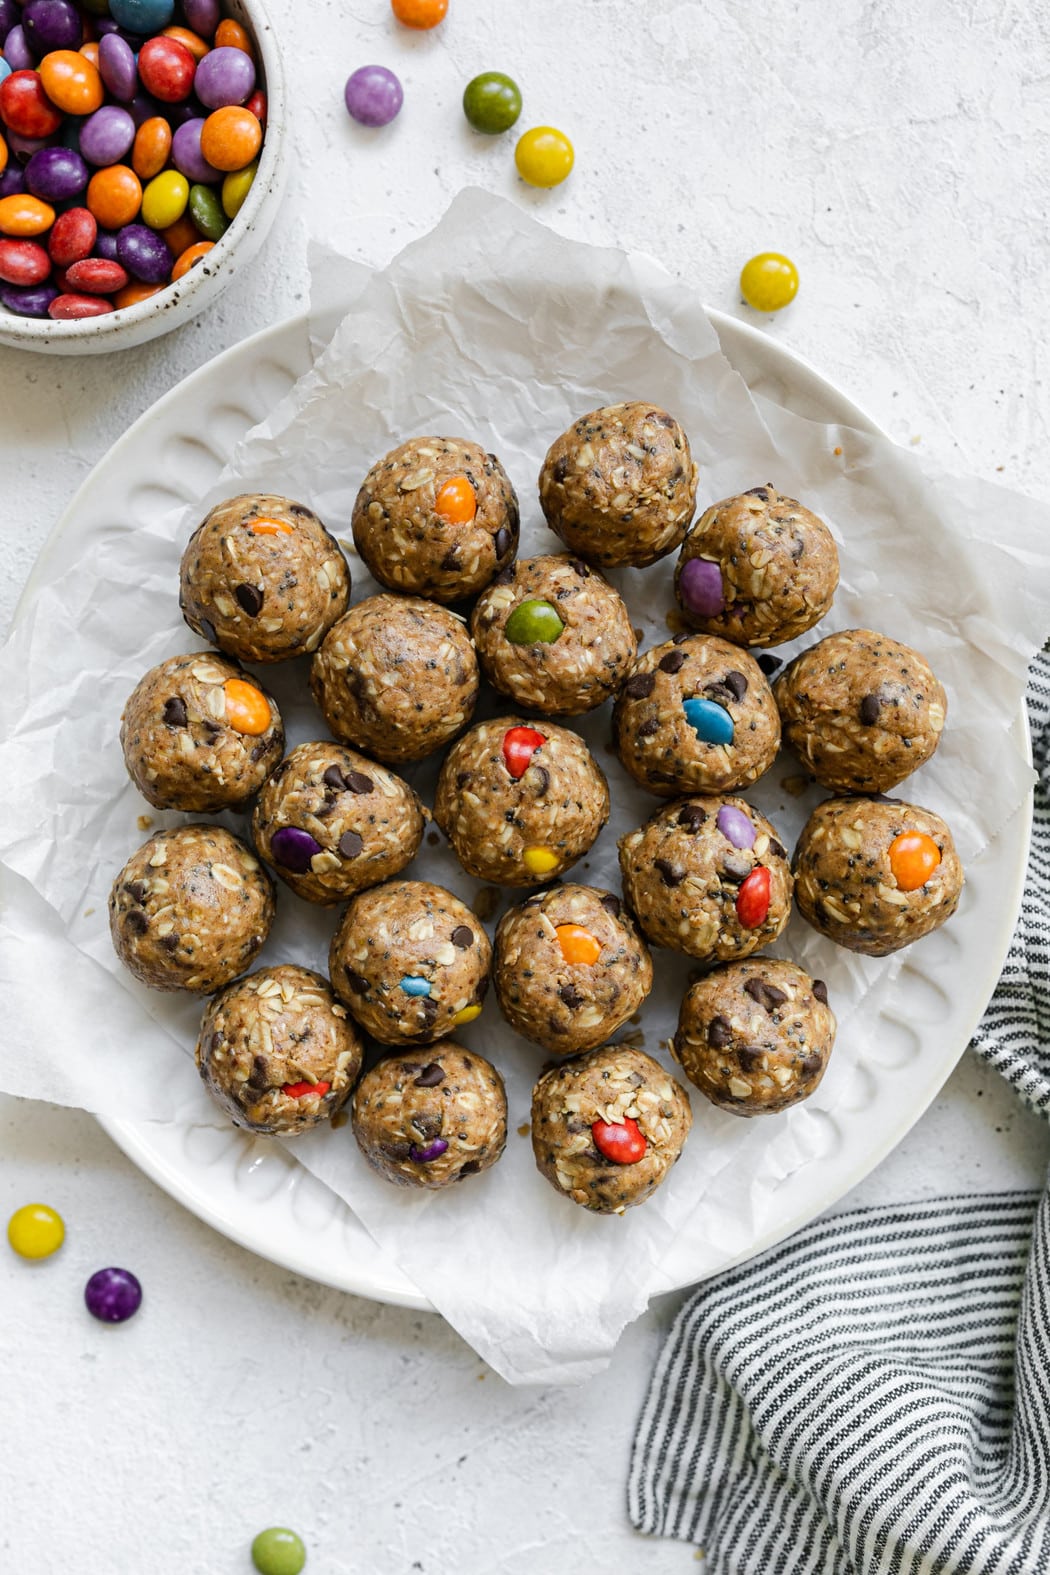 https://therealfooddietitians.com/wp-content/uploads/2021/09/Monster-Cookie-Protein-Balls-10-scaled.jpg